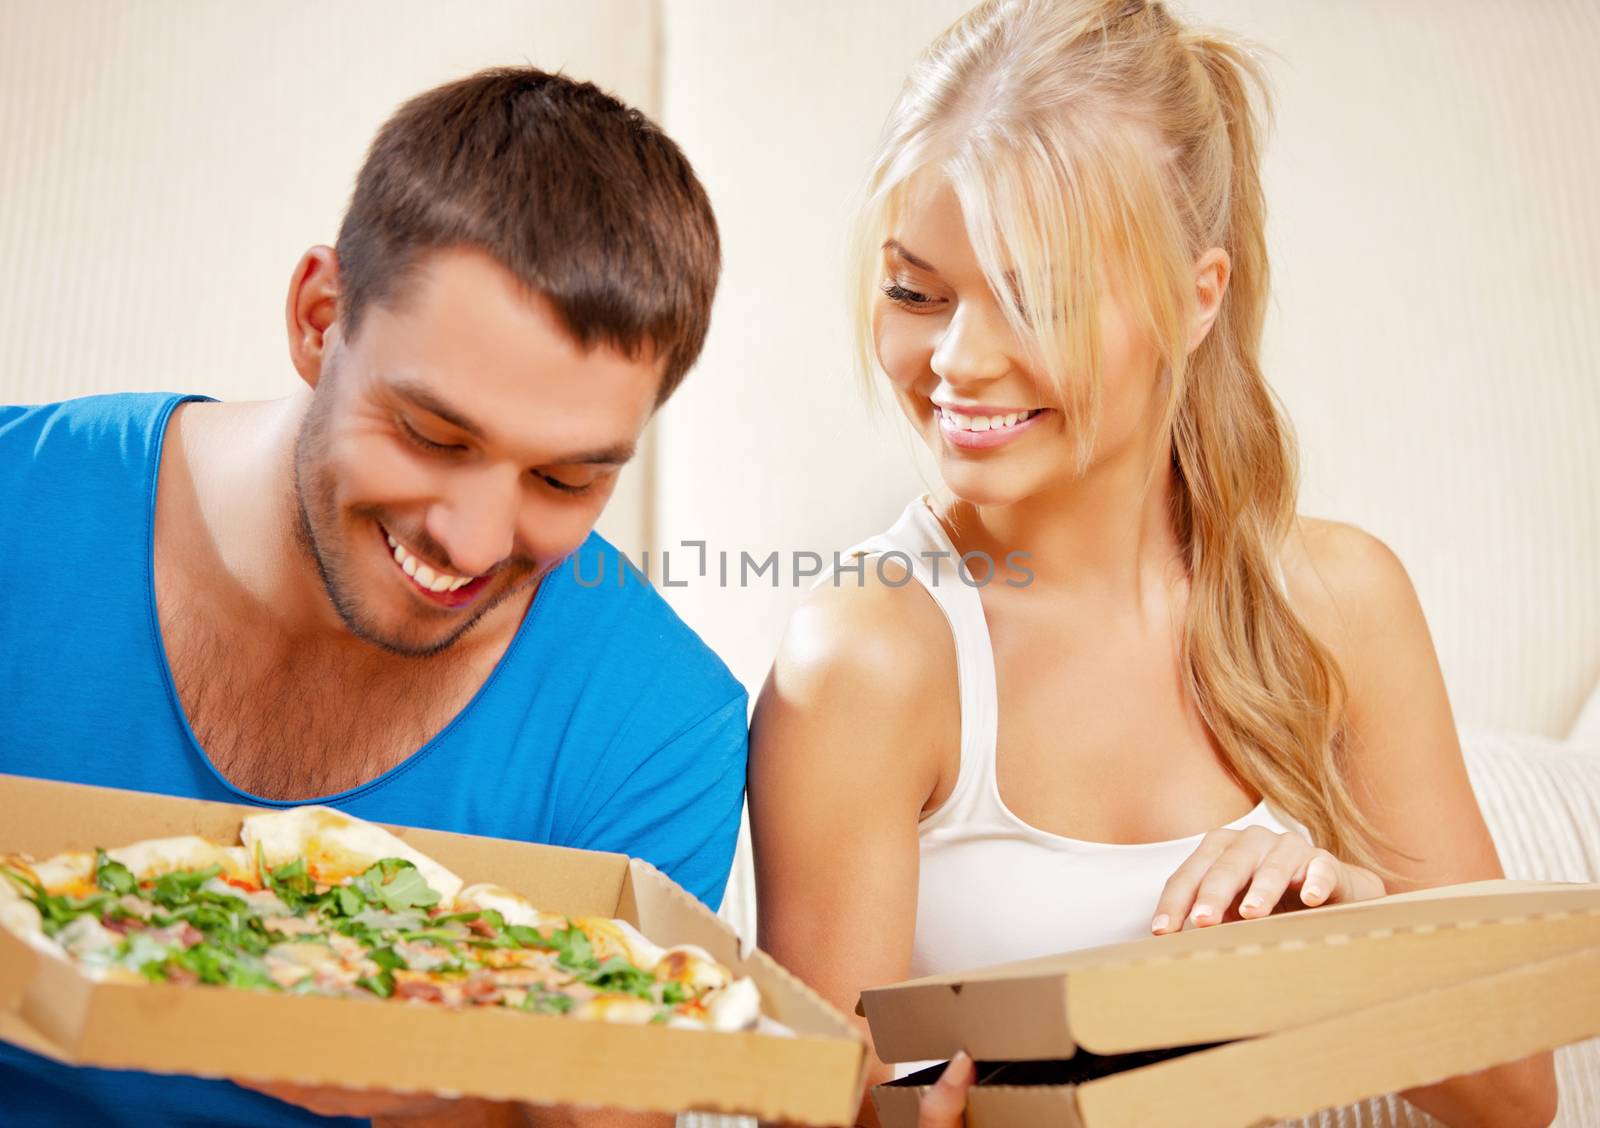 romantic couple eating pizza at home by dolgachov